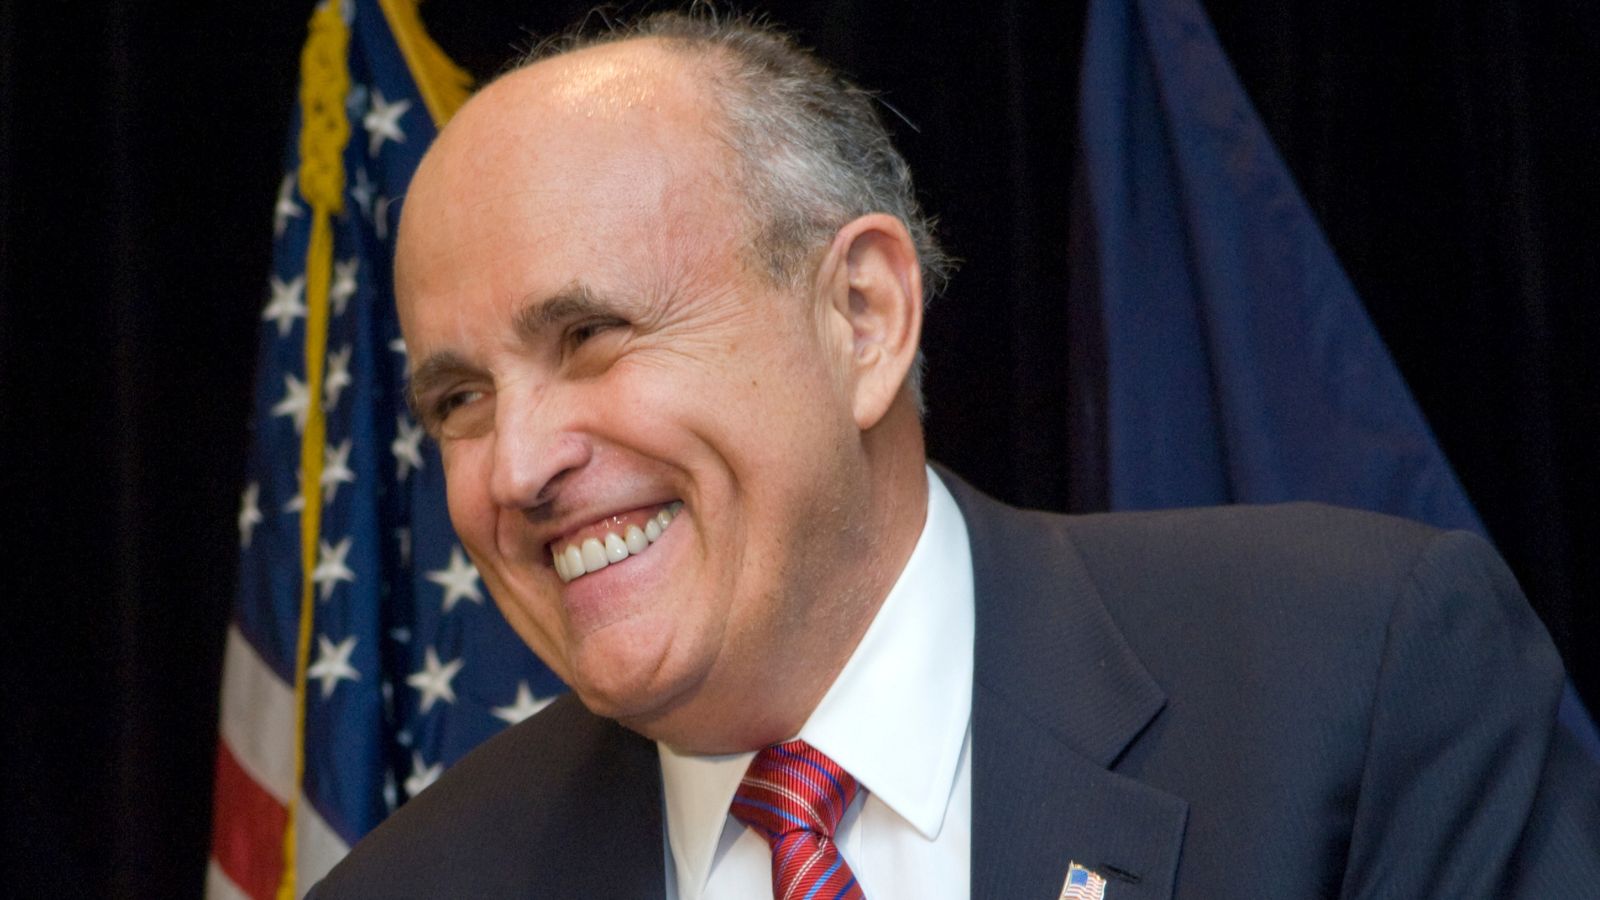 “The Democrat Party Should Have Been Banned Long Ago” – Giuliani Slammed for Tirade Against Democrats